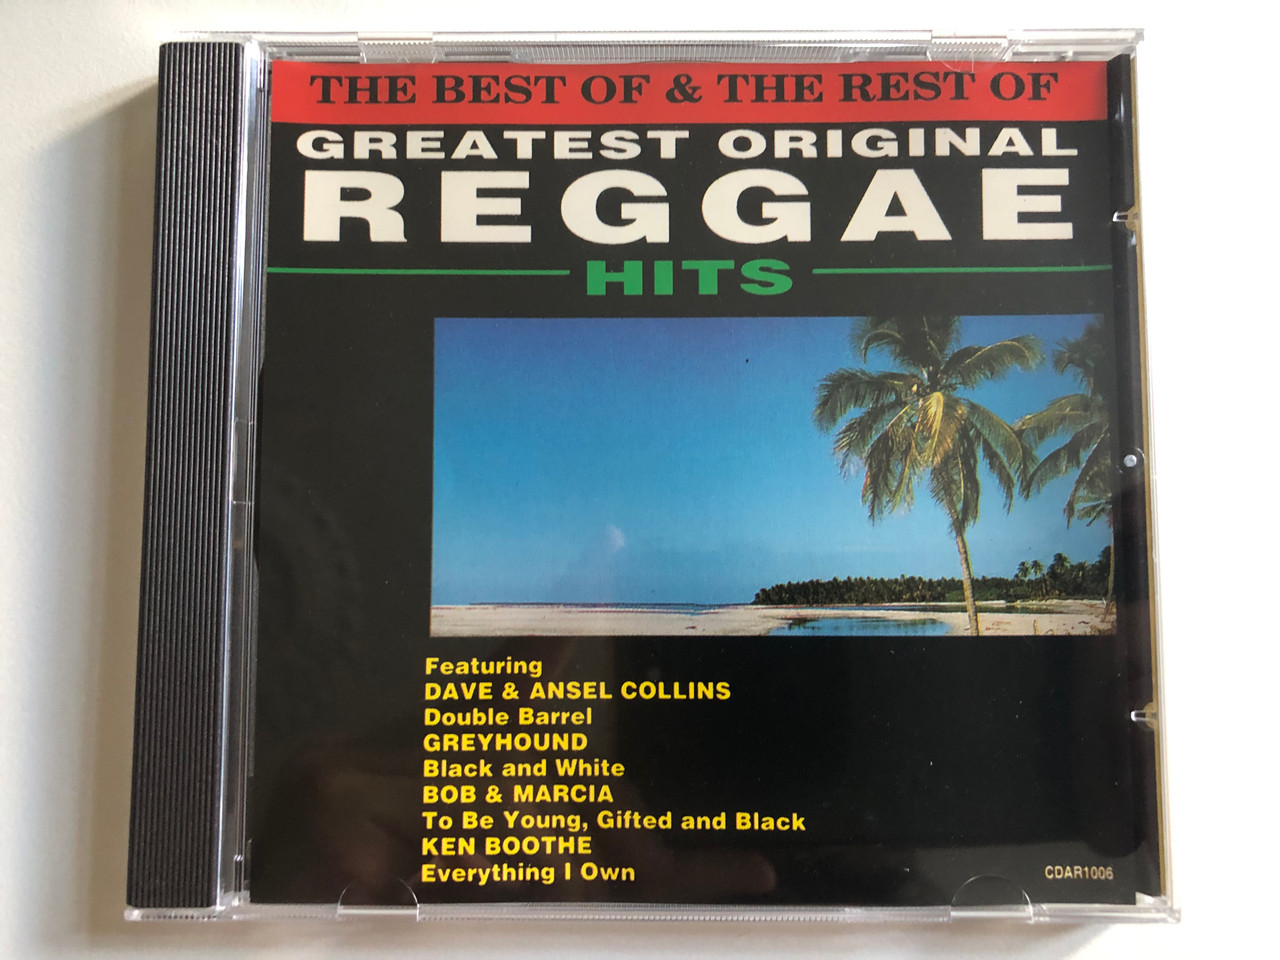 https://cdn10.bigcommerce.com/s-62bdpkt7pb/products/0/images/313855/The_Best_Of_The_Rest_Of_Greatest_Original_Reggae_Hits_Featuring_Dave_Ansel_Collins_-_Double_Barrel_Greyhound_-_Black_And_White_Bob_Marcia_-_To_Be_Young_Gifted_and_Black_Action_Re_1__08161.1701090880.1280.1280.JPG?c=2